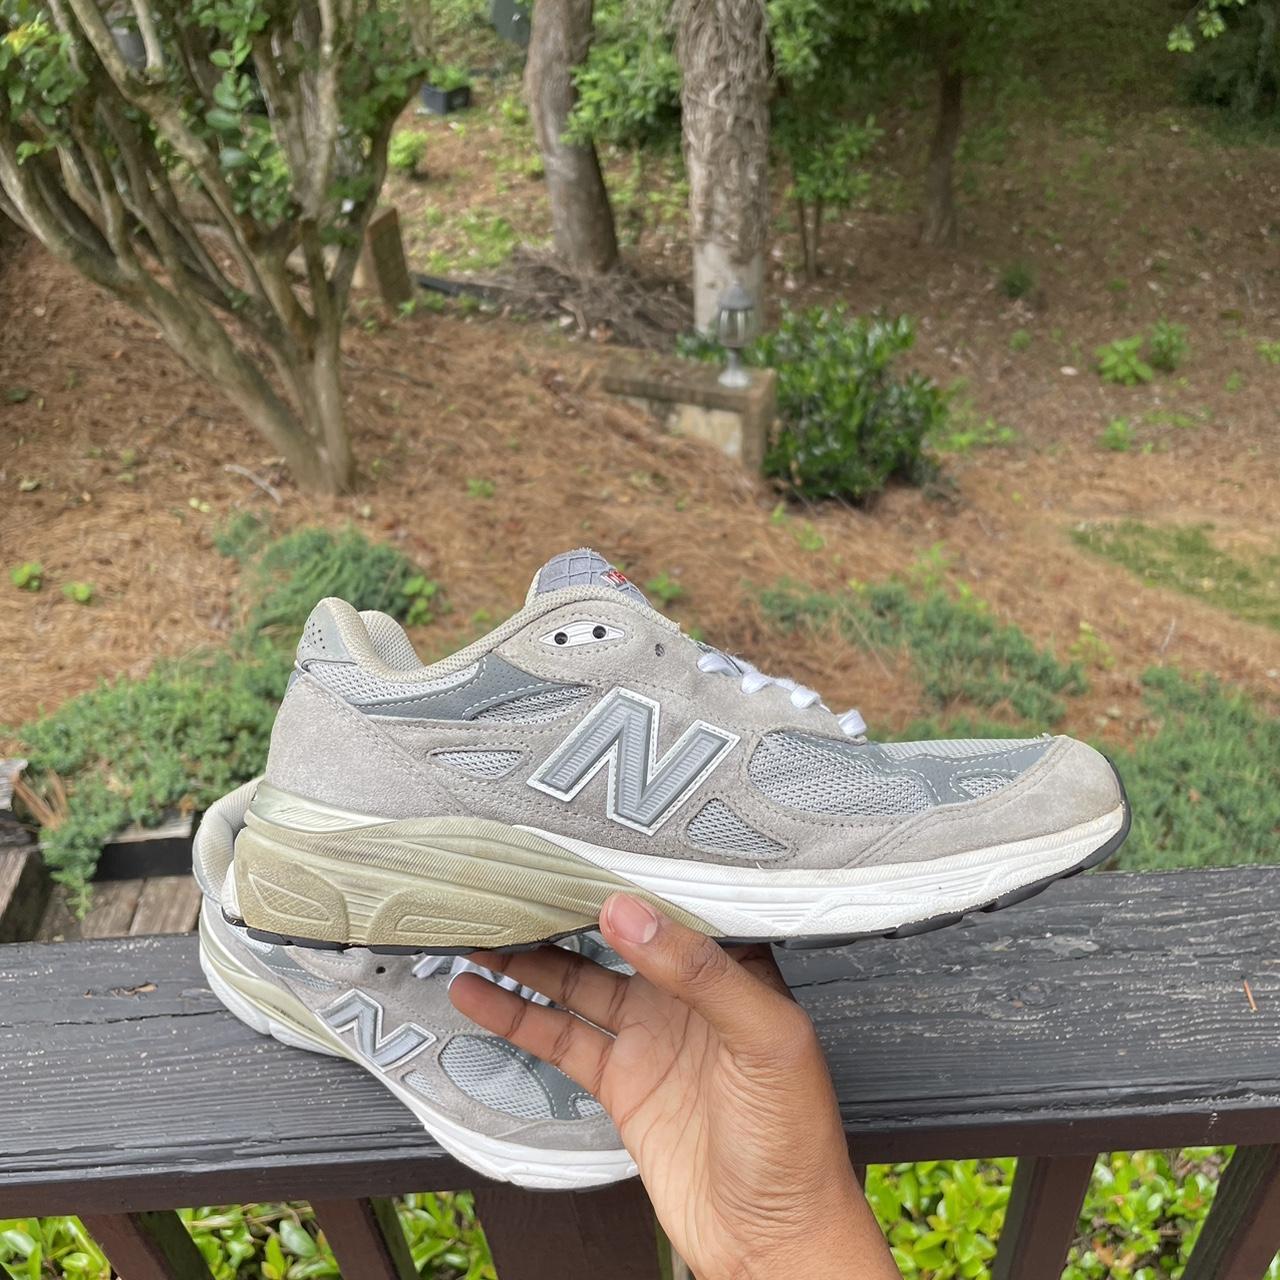 New Balance Men's Grey and White Trainers (3)